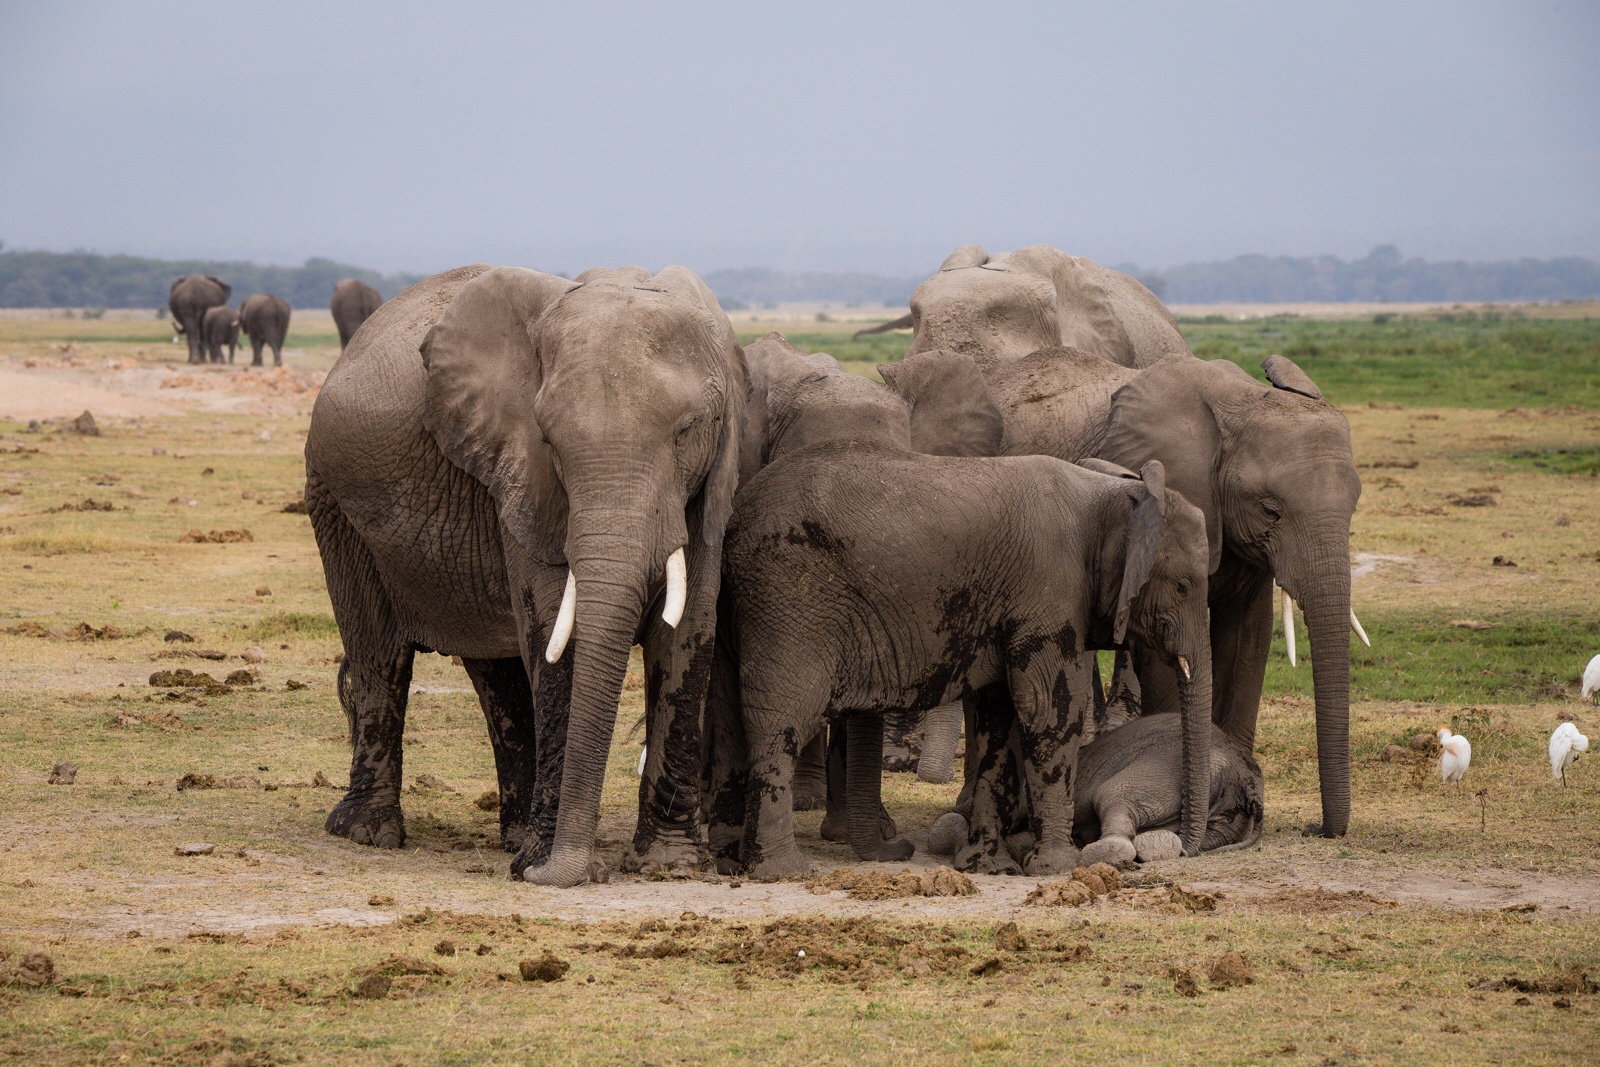 A family of elephants waiting for the baby to finish its nap before making the journey back to where they sleep from the swamp in Amboseli.